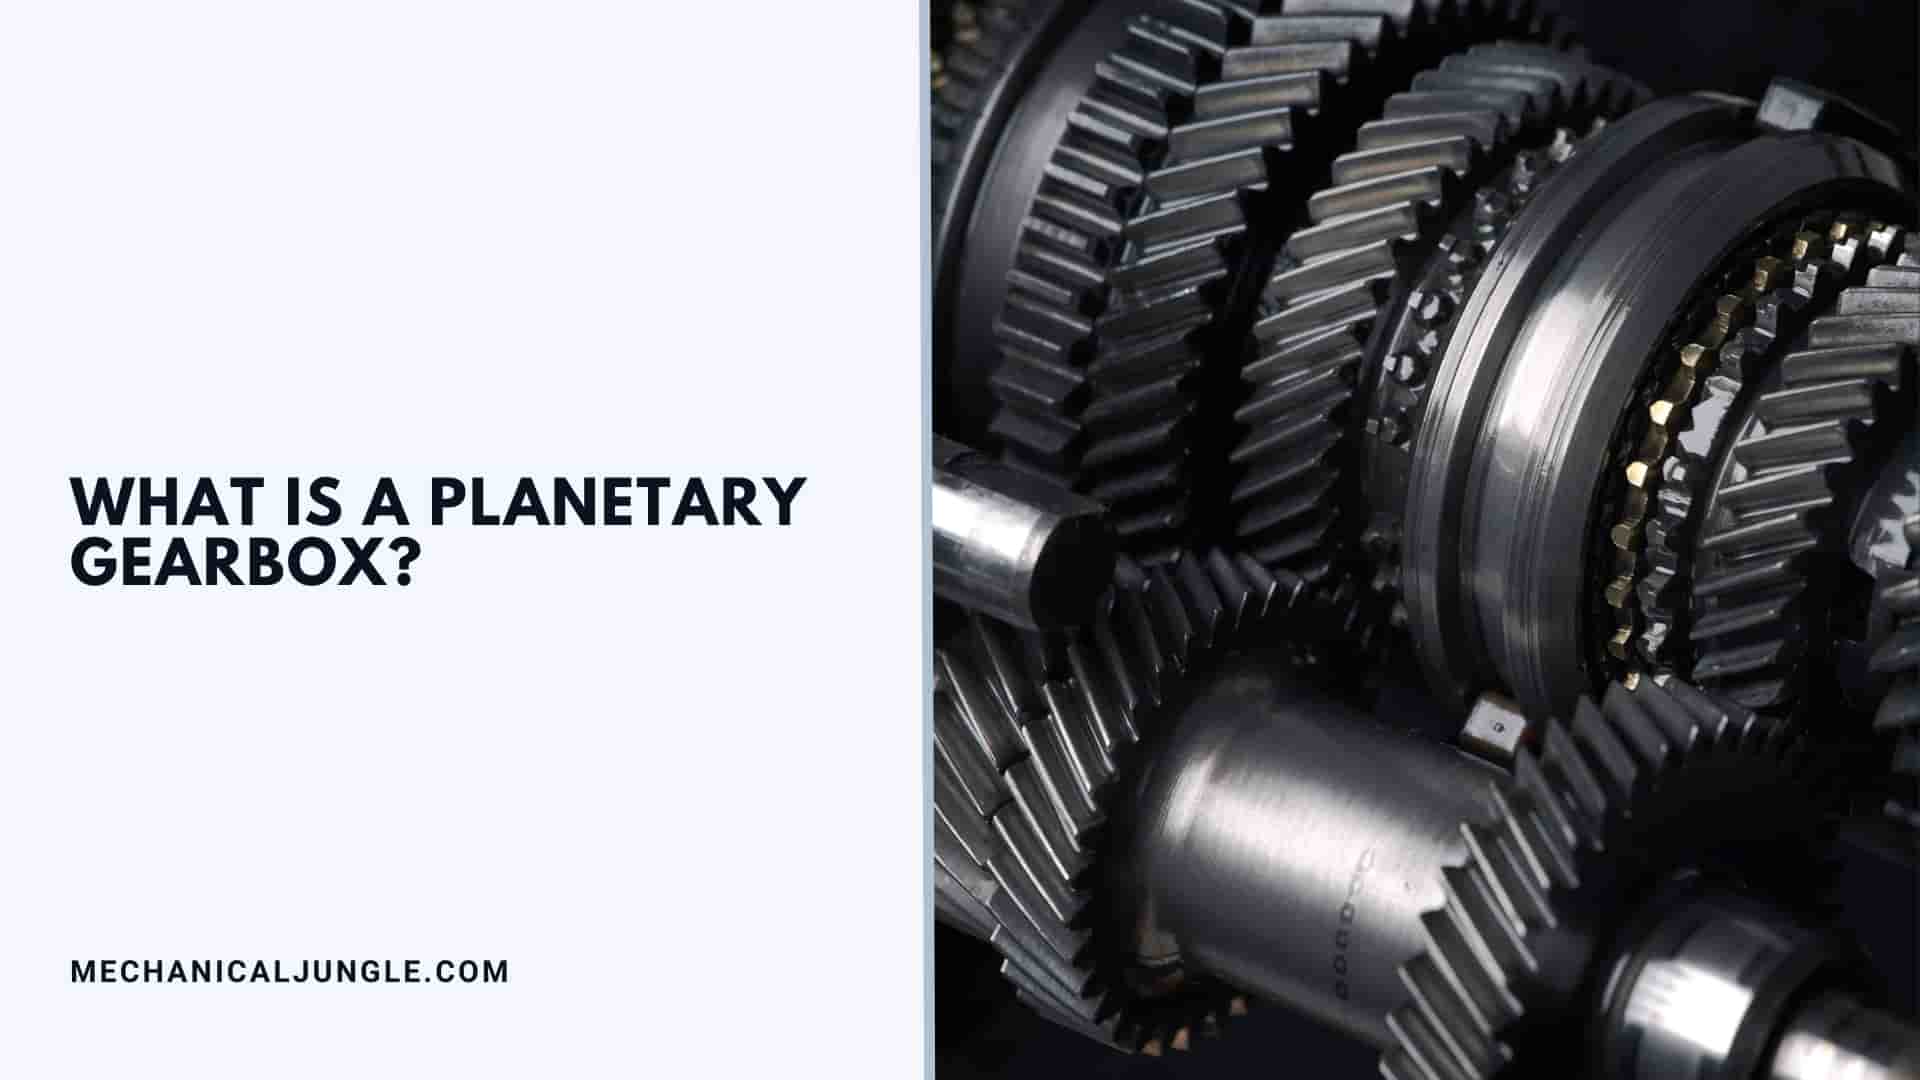 What Is a Planetary Gearbox?